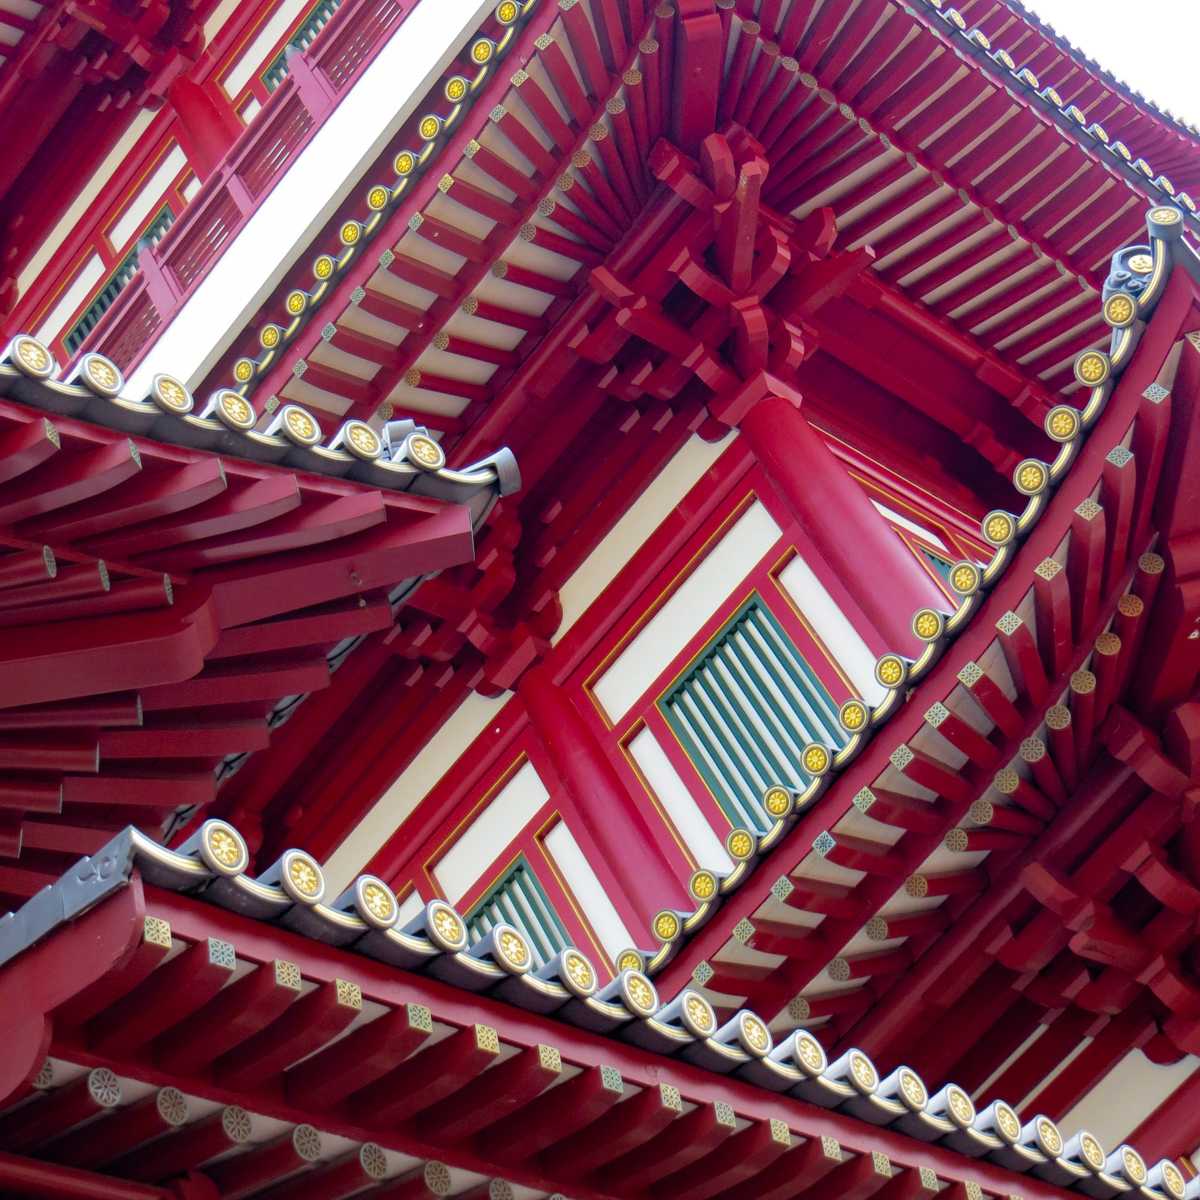 Looking up at the tiered red rooftops of the Buddha Tooth Relic Temple in Chinatown.